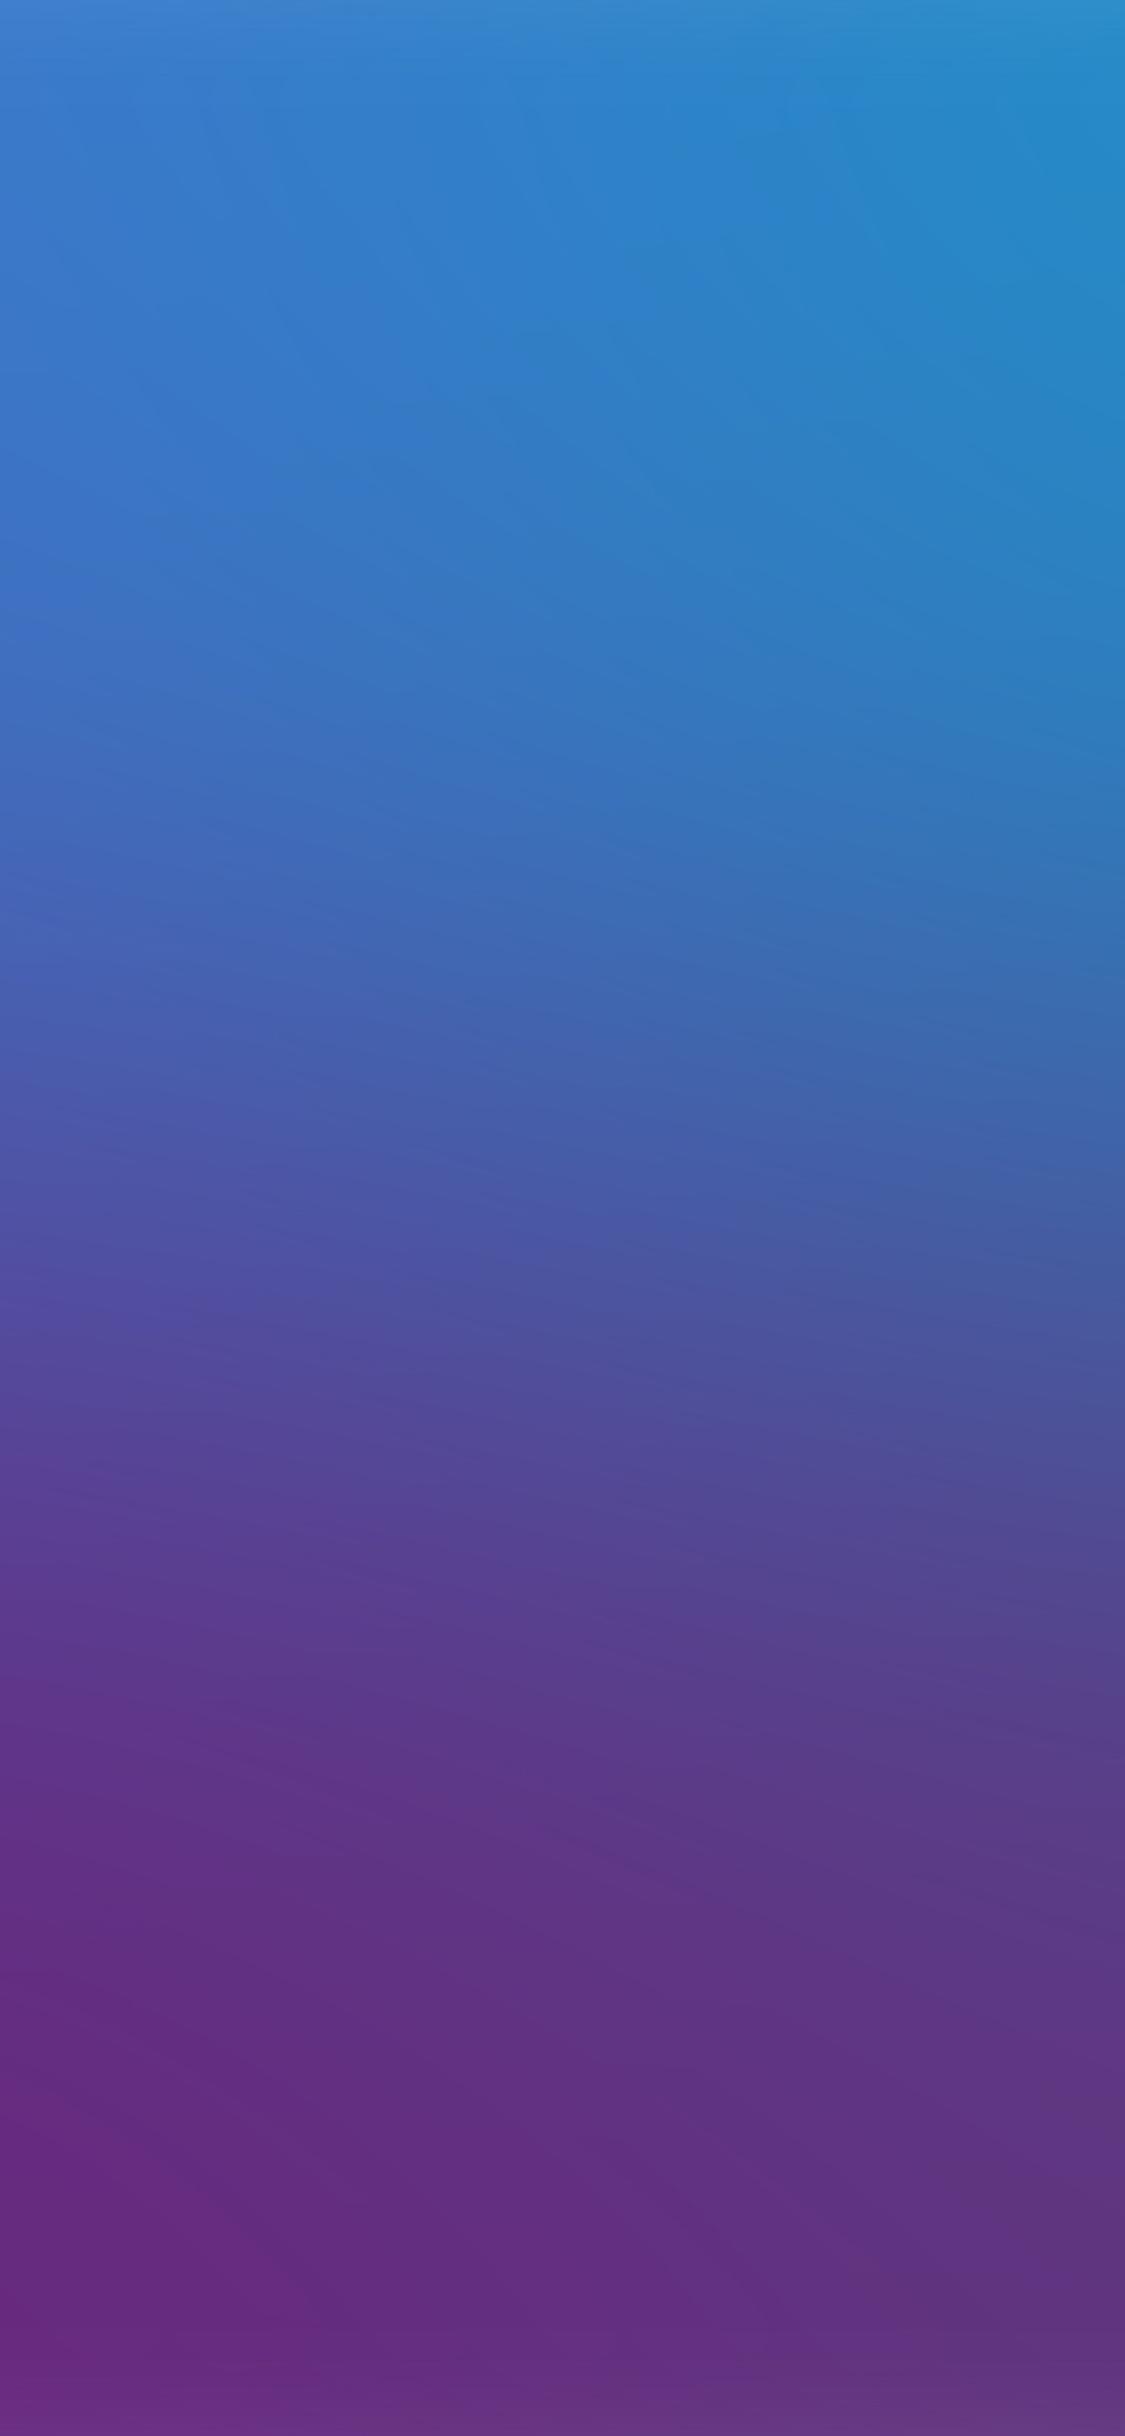 Blue and Purple iPhone Wallpapers - Top Free Blue and Purple iPhone ...